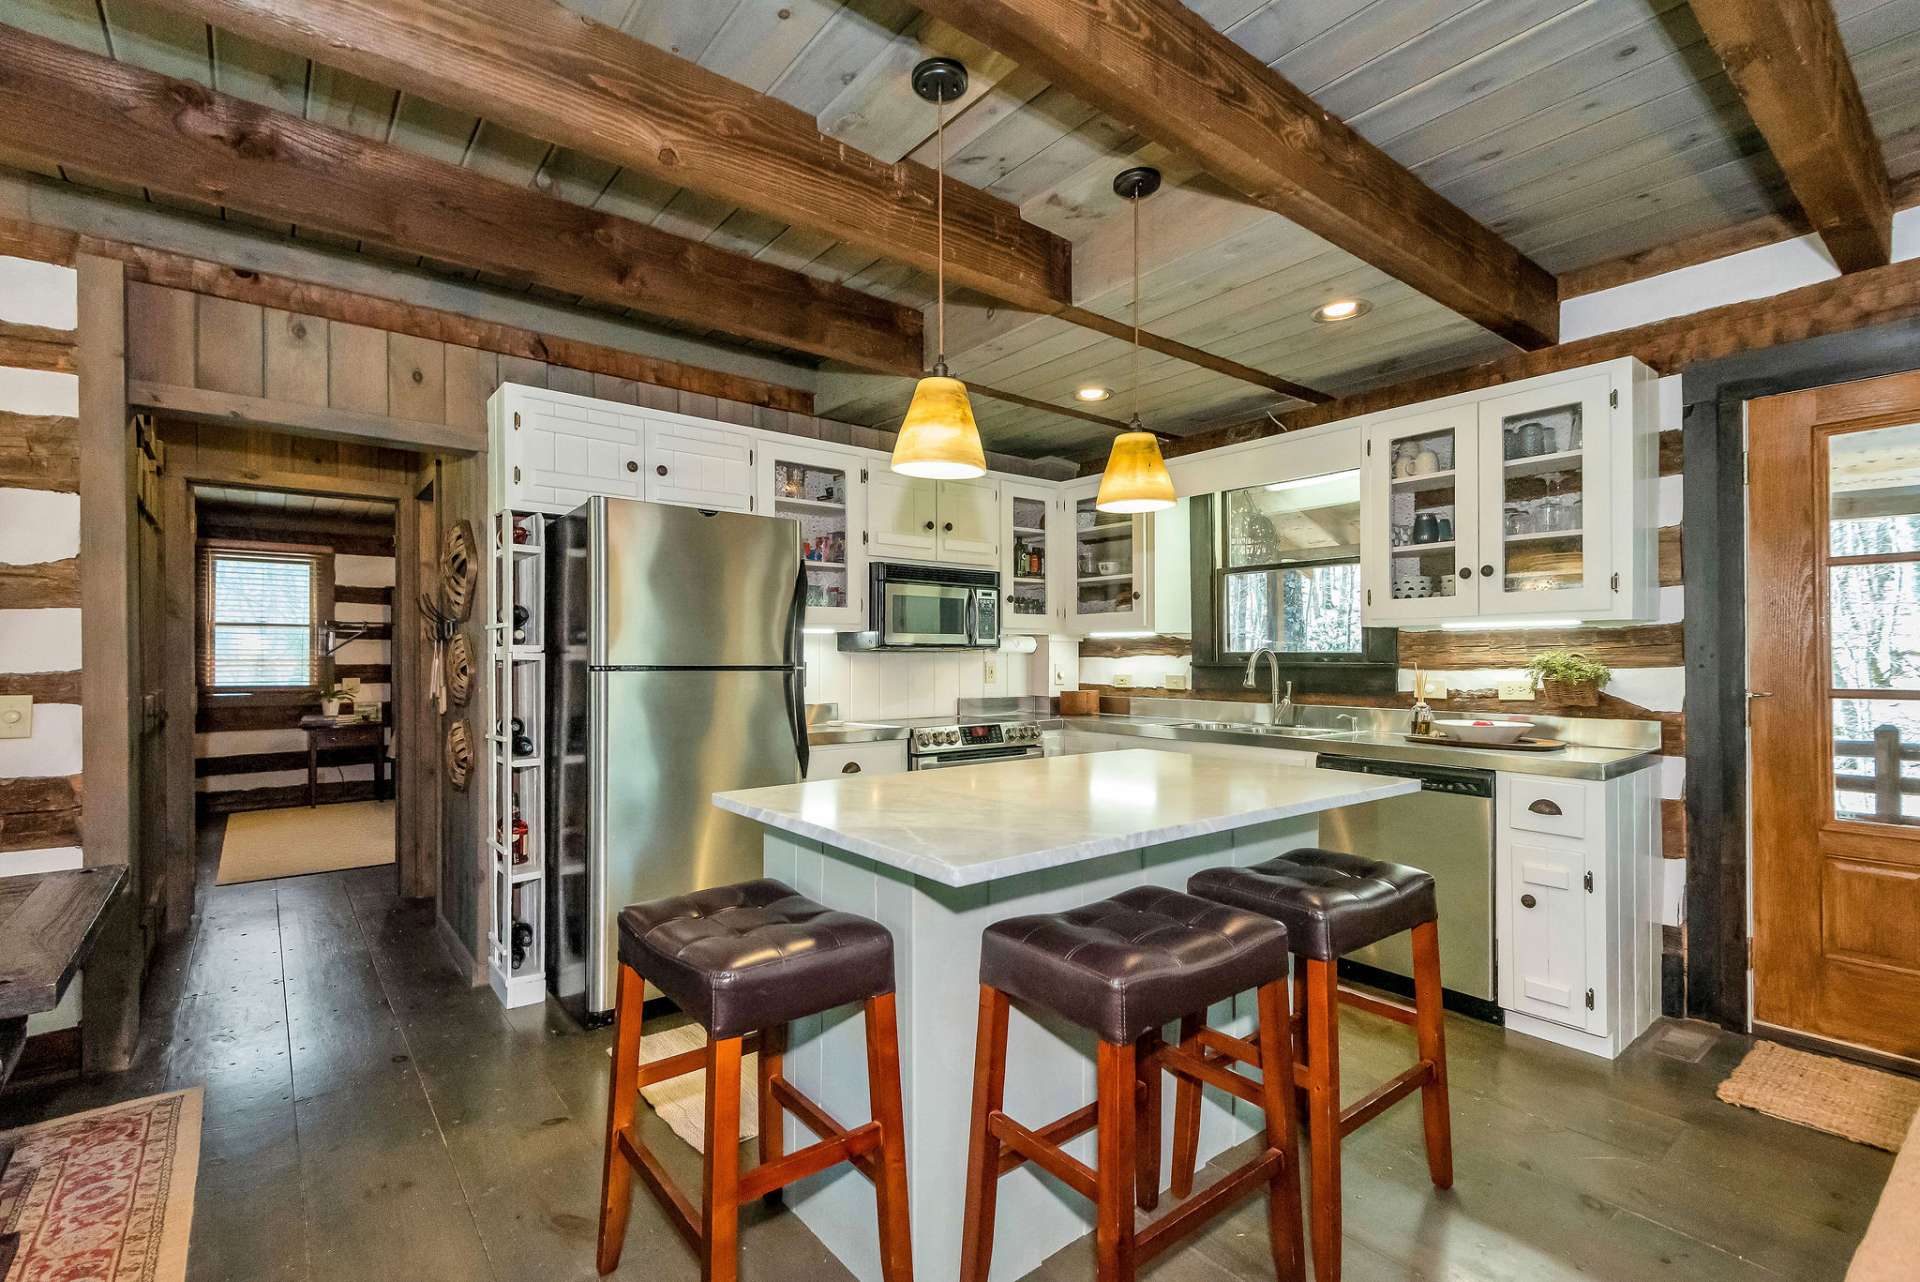 The kitchen maintains the rustic charm and functionality characteristic of cabin living. The light colored cabinets help to visually expand the space and make it feel more open and welcoming.